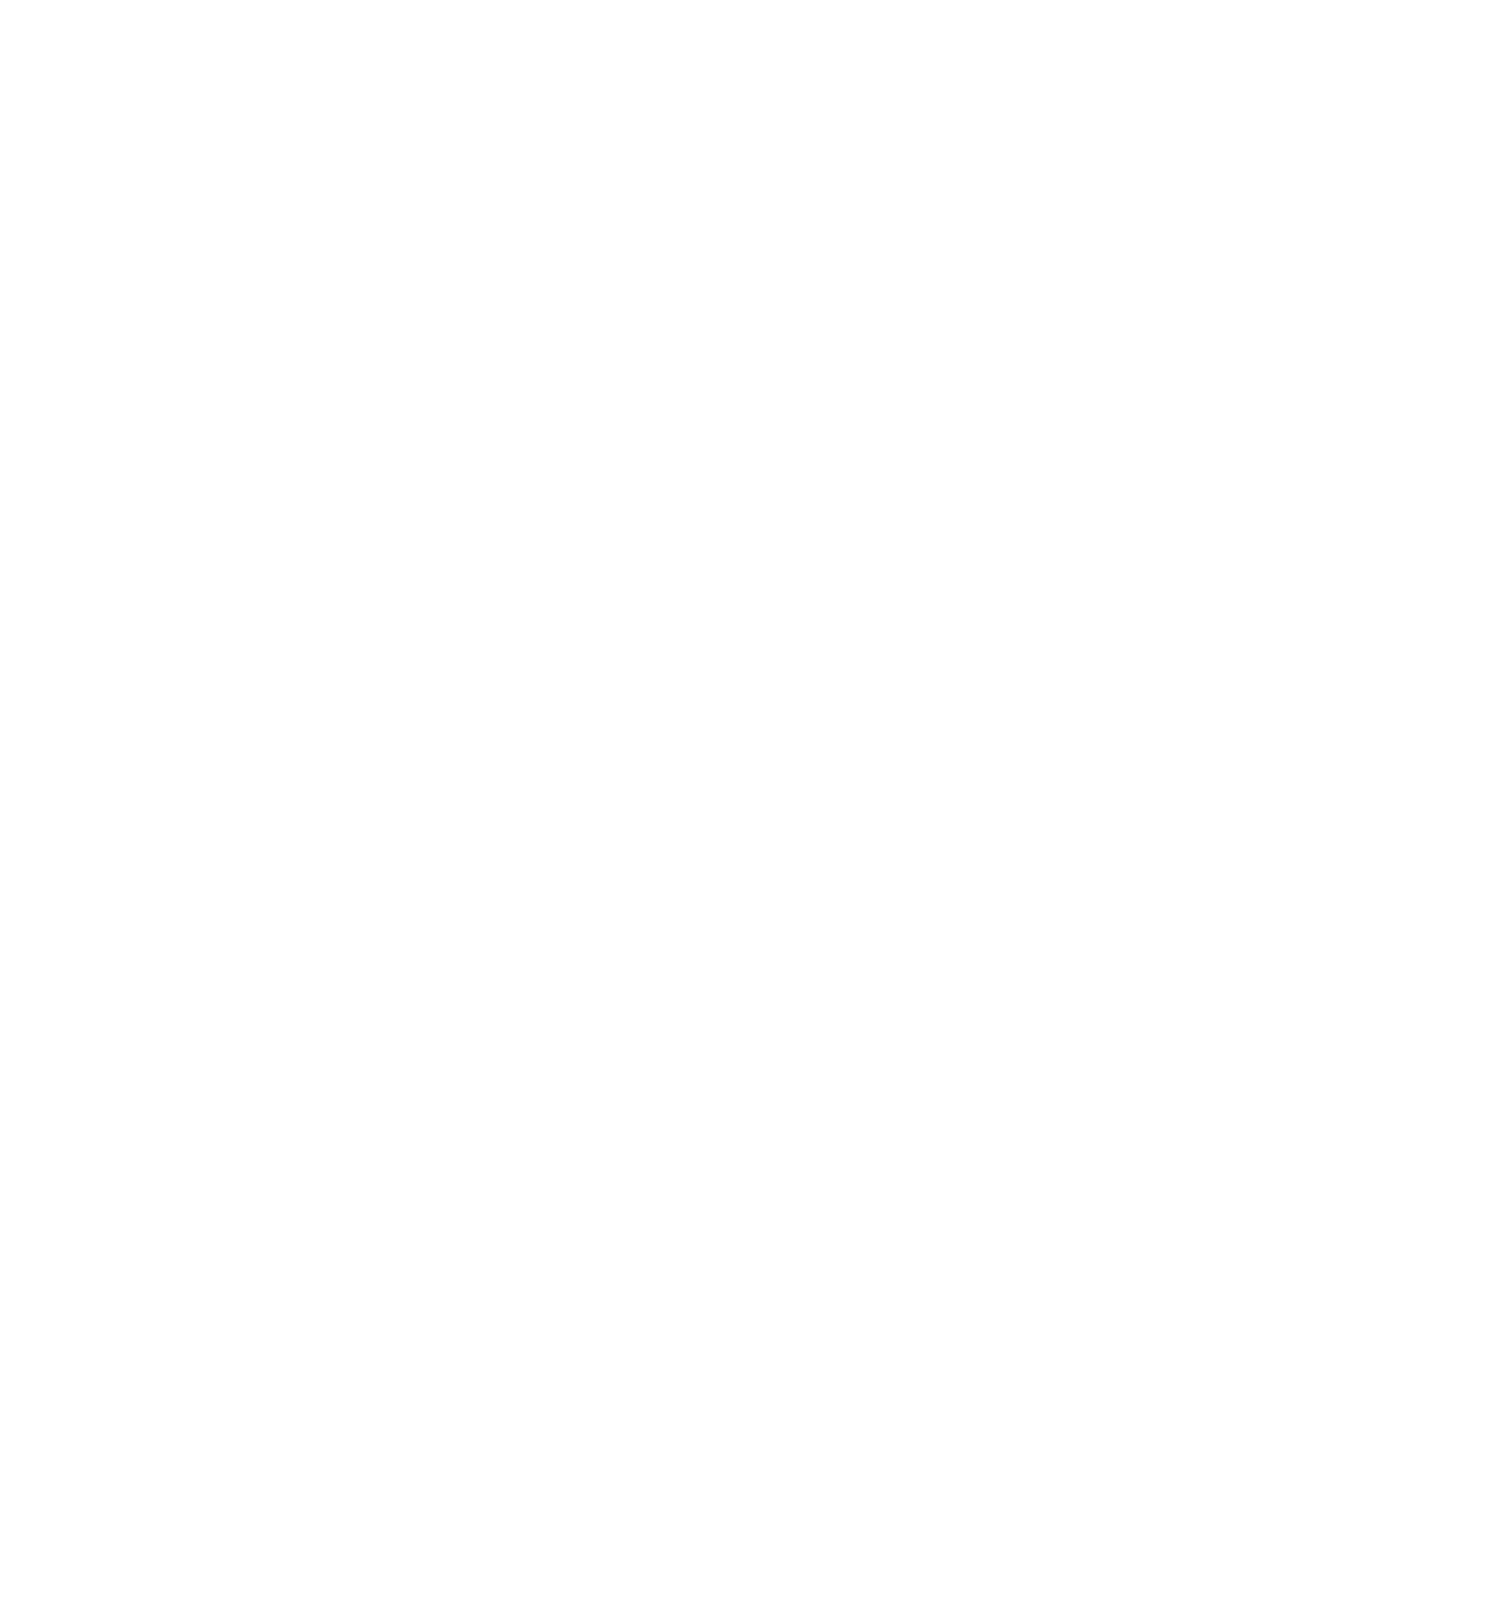 Strictly In Style